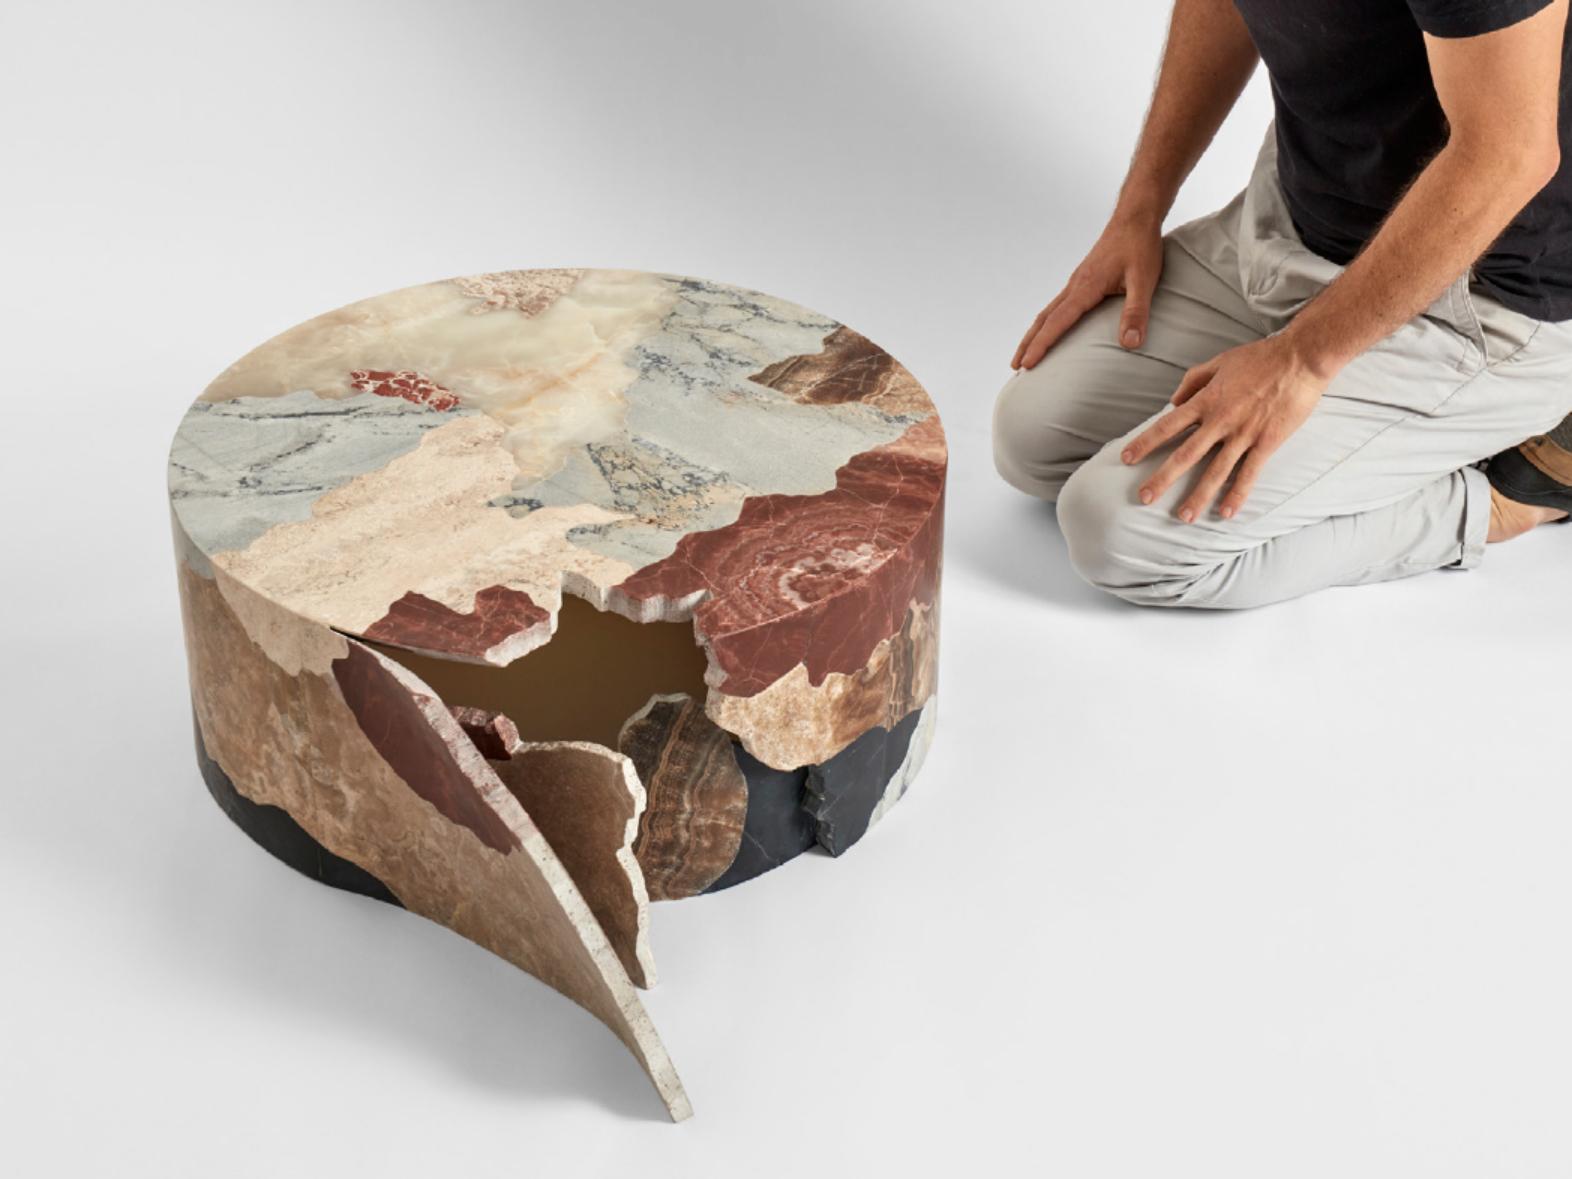 Geology of Diverse N°1 by Estudio Rafael Freyre
Dimensions: W 87 x D 60 x H 25 cm
Materials: Diverse recycled Andes stones

In Geology of the Diverse the pieces form a territory or place we can access with our body and relate to its unfinished